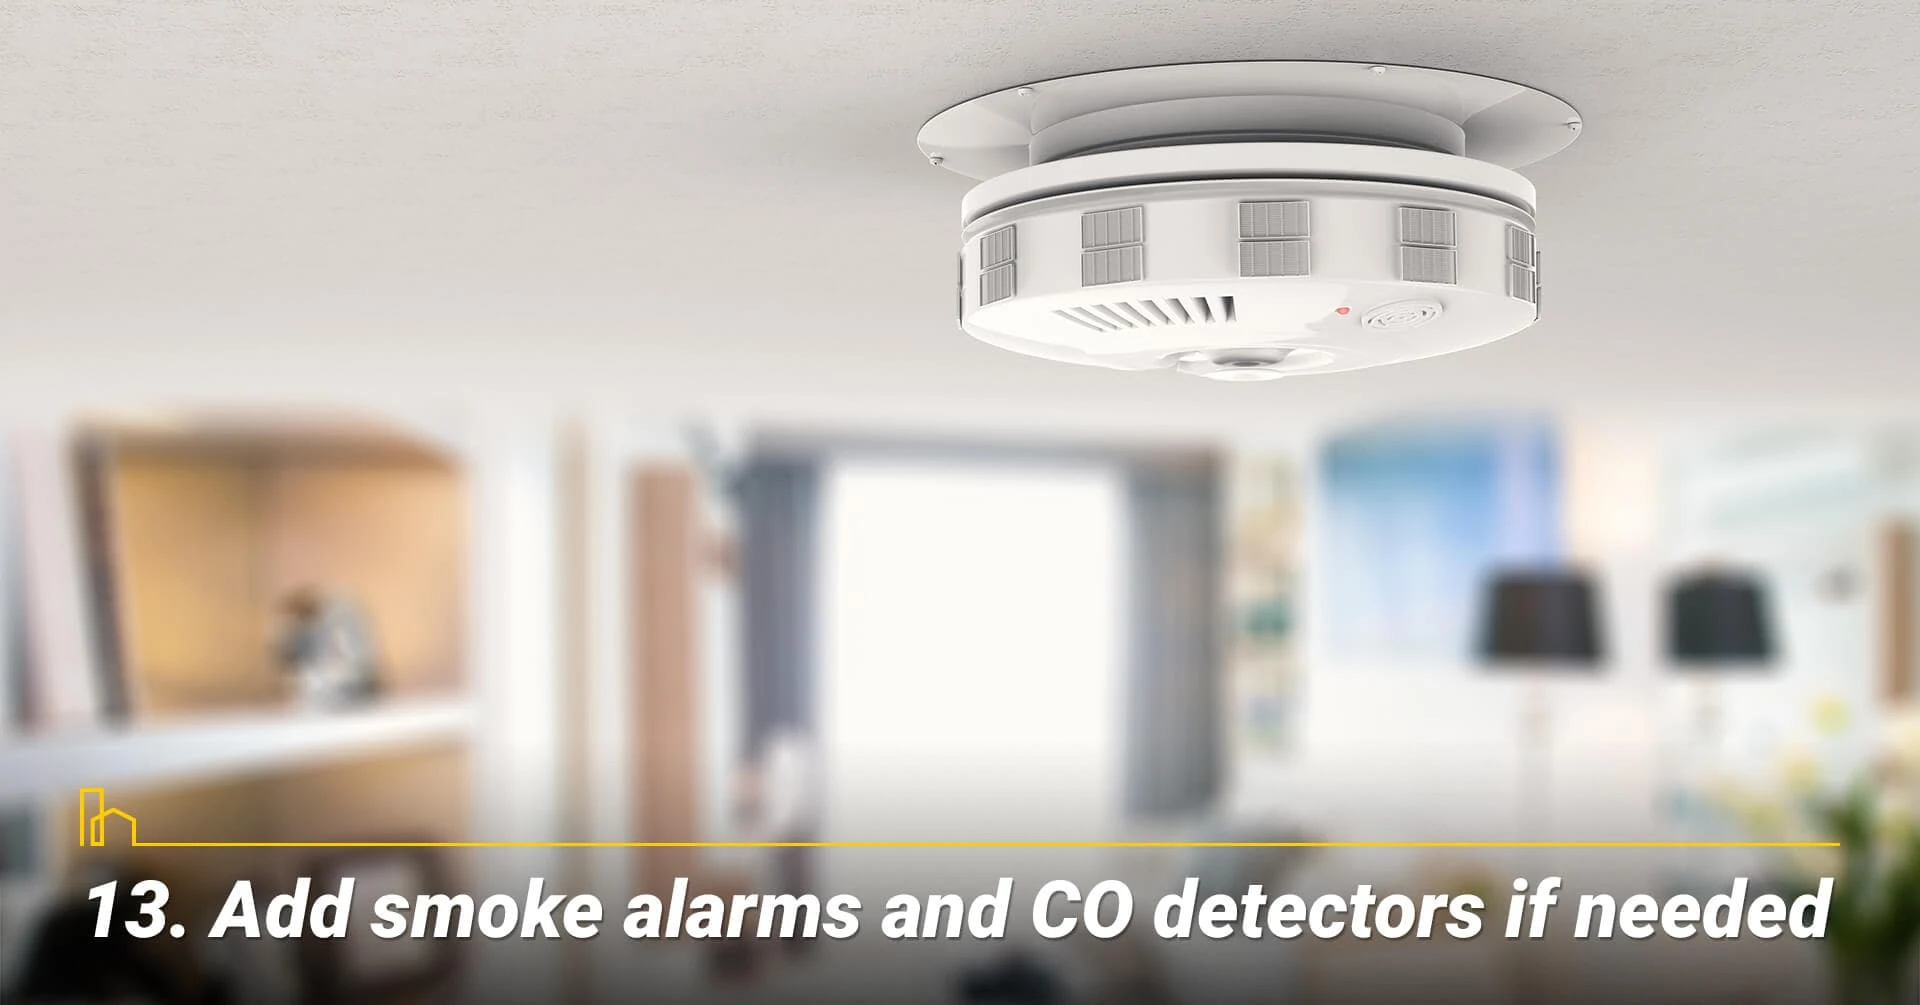 Add smoke alarms and CO detectors if needed, replace old smoke alarms and CO detectors